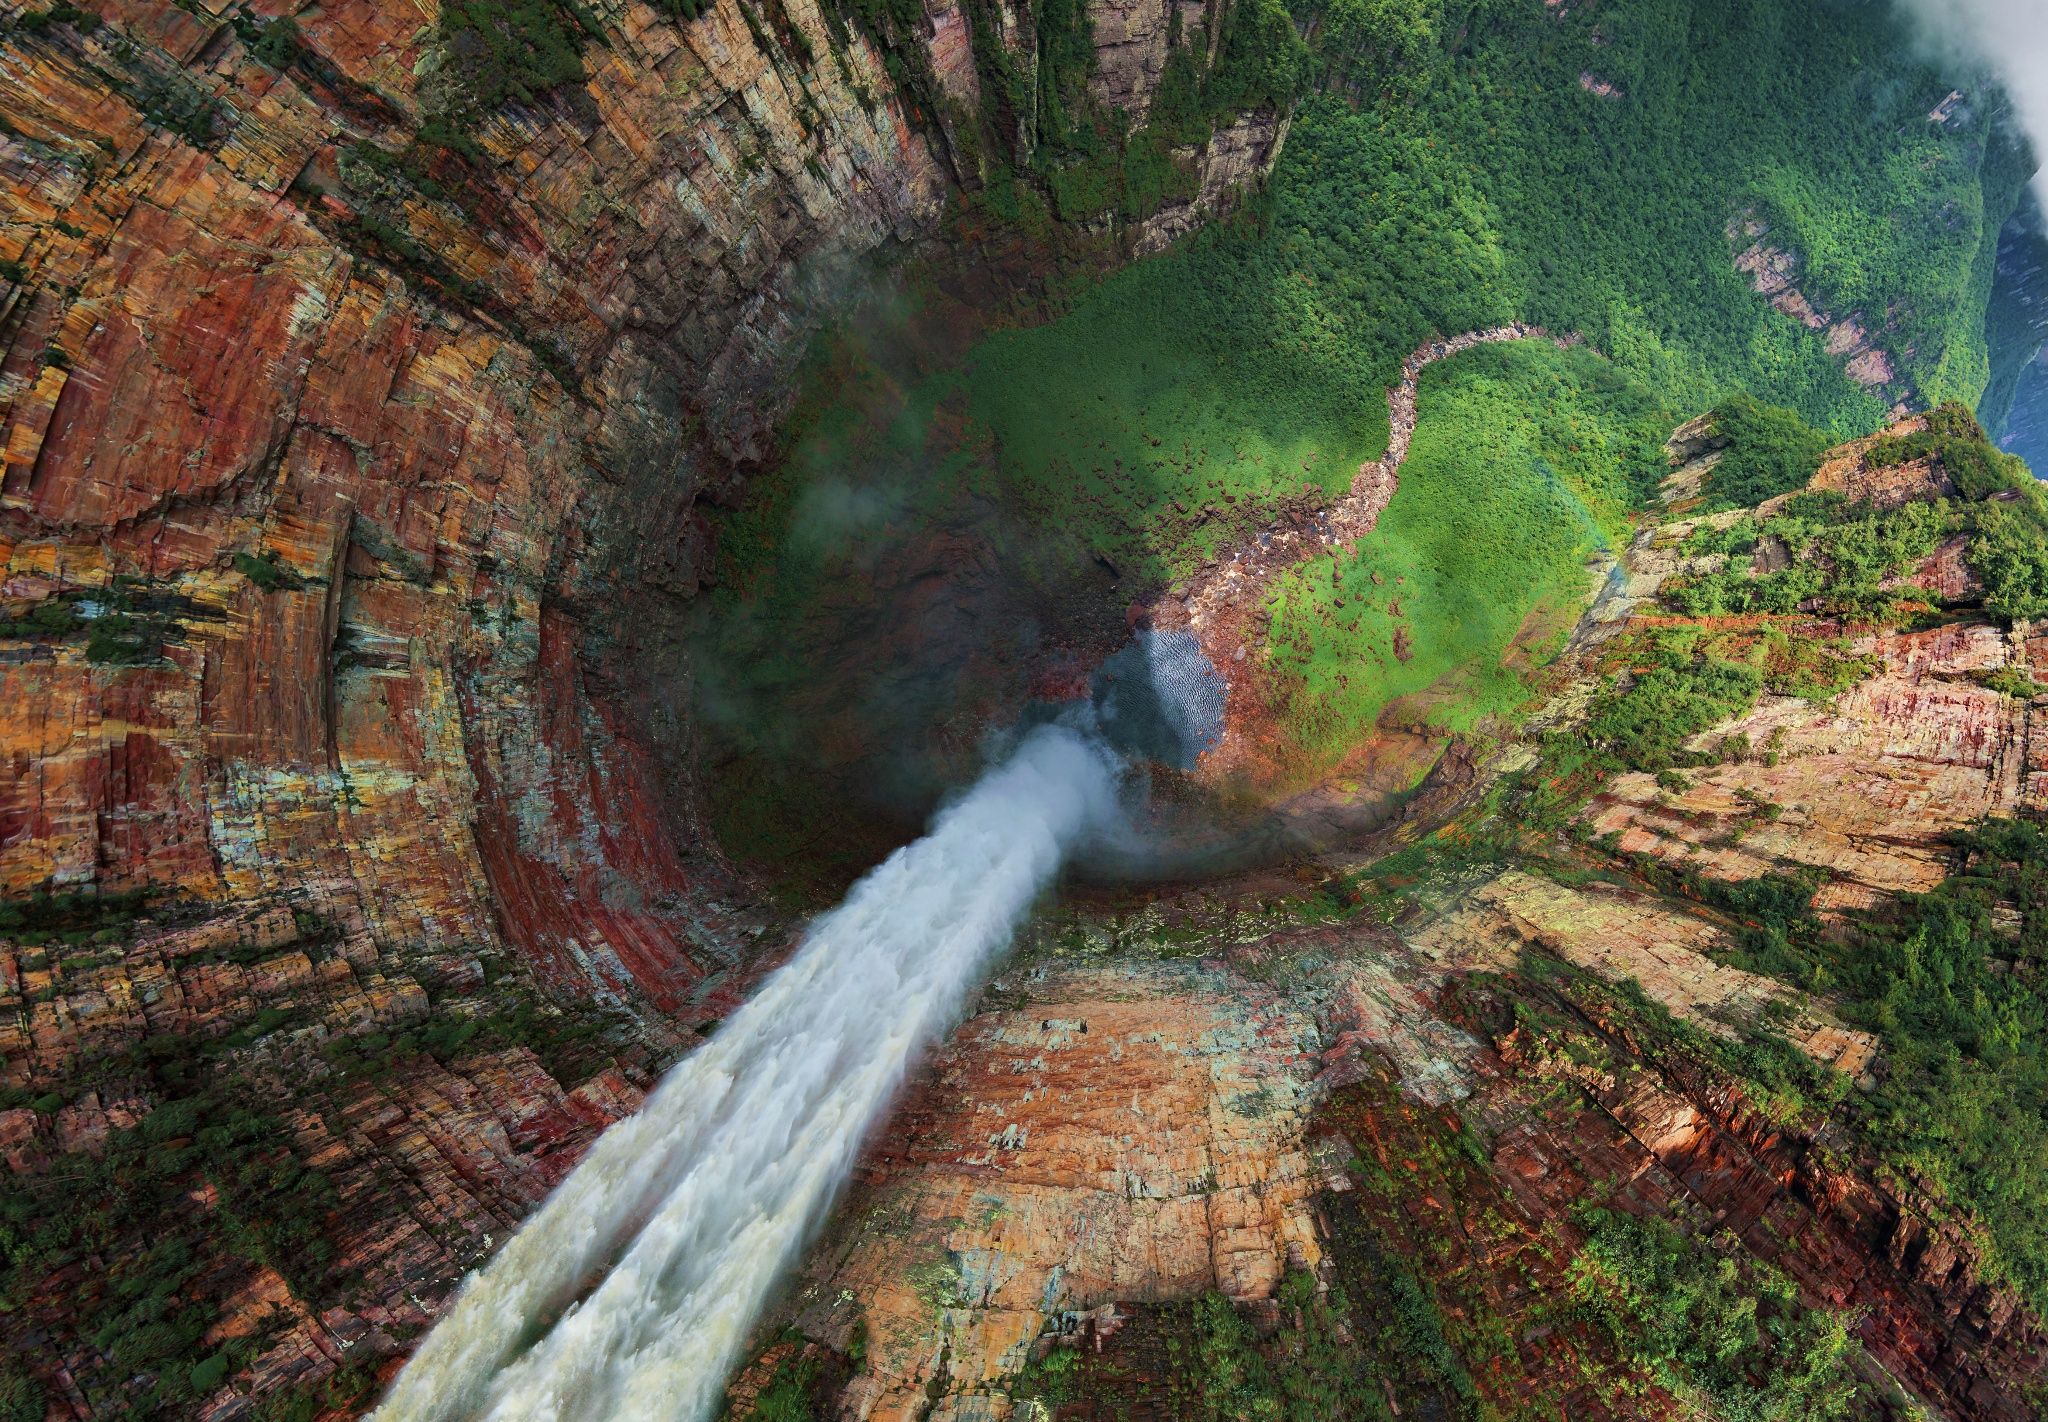 This Group of Photo Enthusiasts Travel the Globe Creating Astonishing Aerial Panoramas